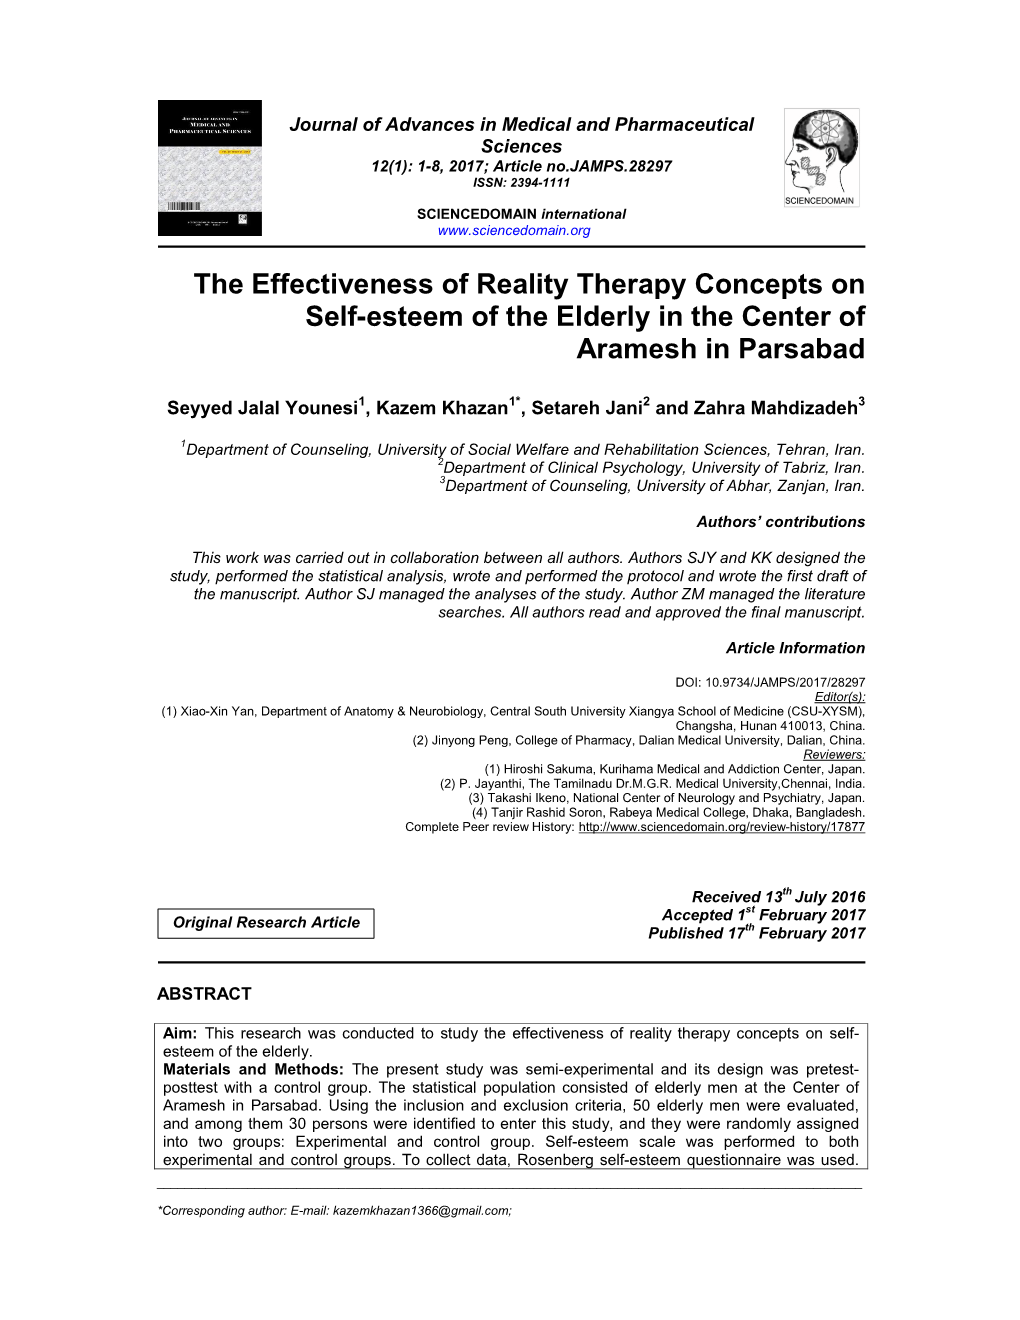 The Effectiveness of Reality Therapy Concepts on Self-Esteem of the Elderly in the Center of Aramesh in Parsabad